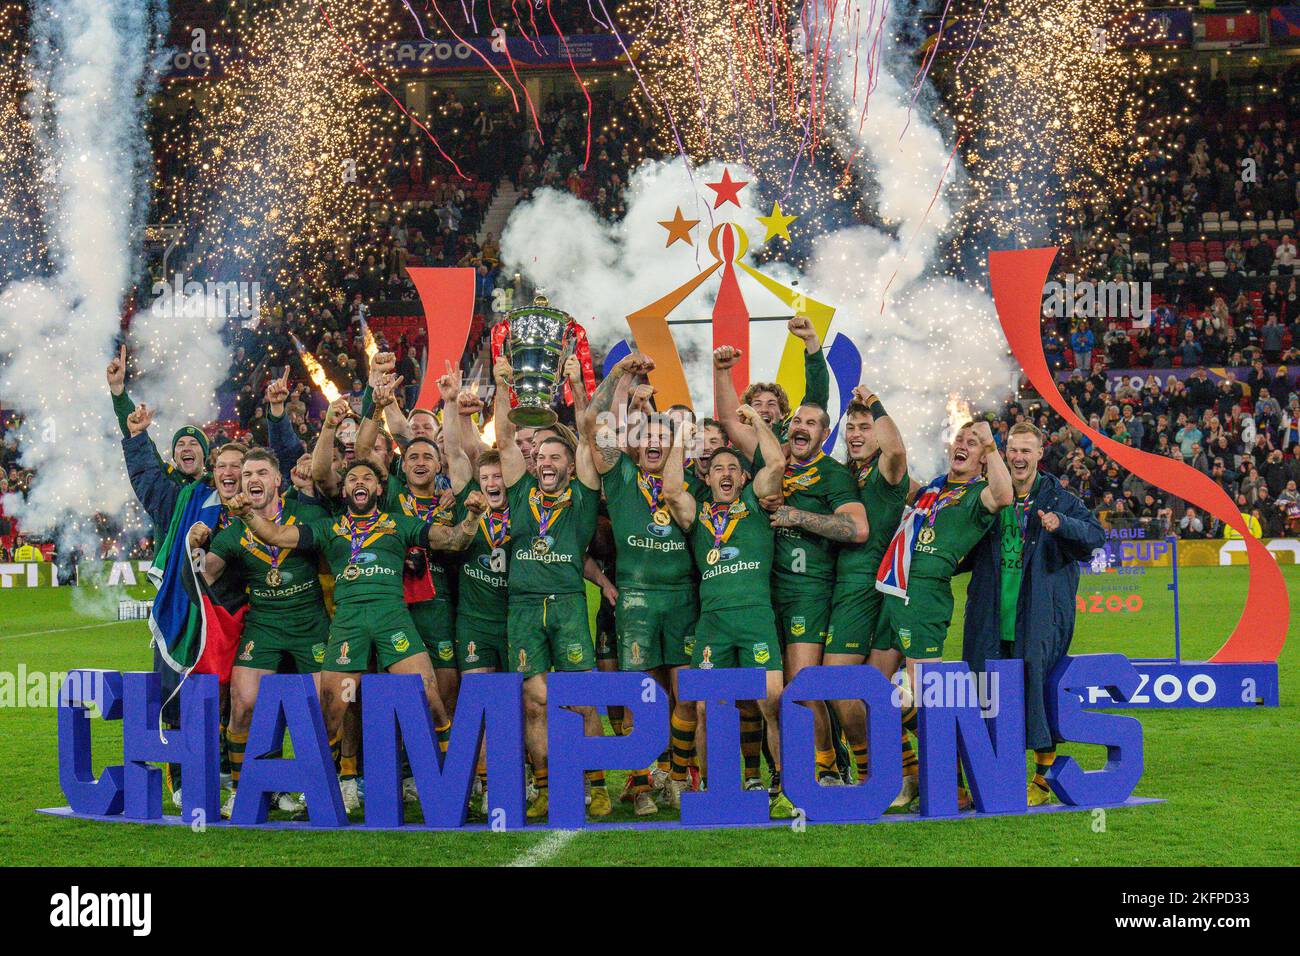 Manchester, UK. 18th Nov, 2022. Australia players lift the trophy after winning the 2021 Rugby League World Cup Final 2021 match between Australia and Samoa at Old Trafford, Manchester, England on 19 November 2022. Photo by David Horn. Credit: PRiME Media Images/Alamy Live News Stock Photo